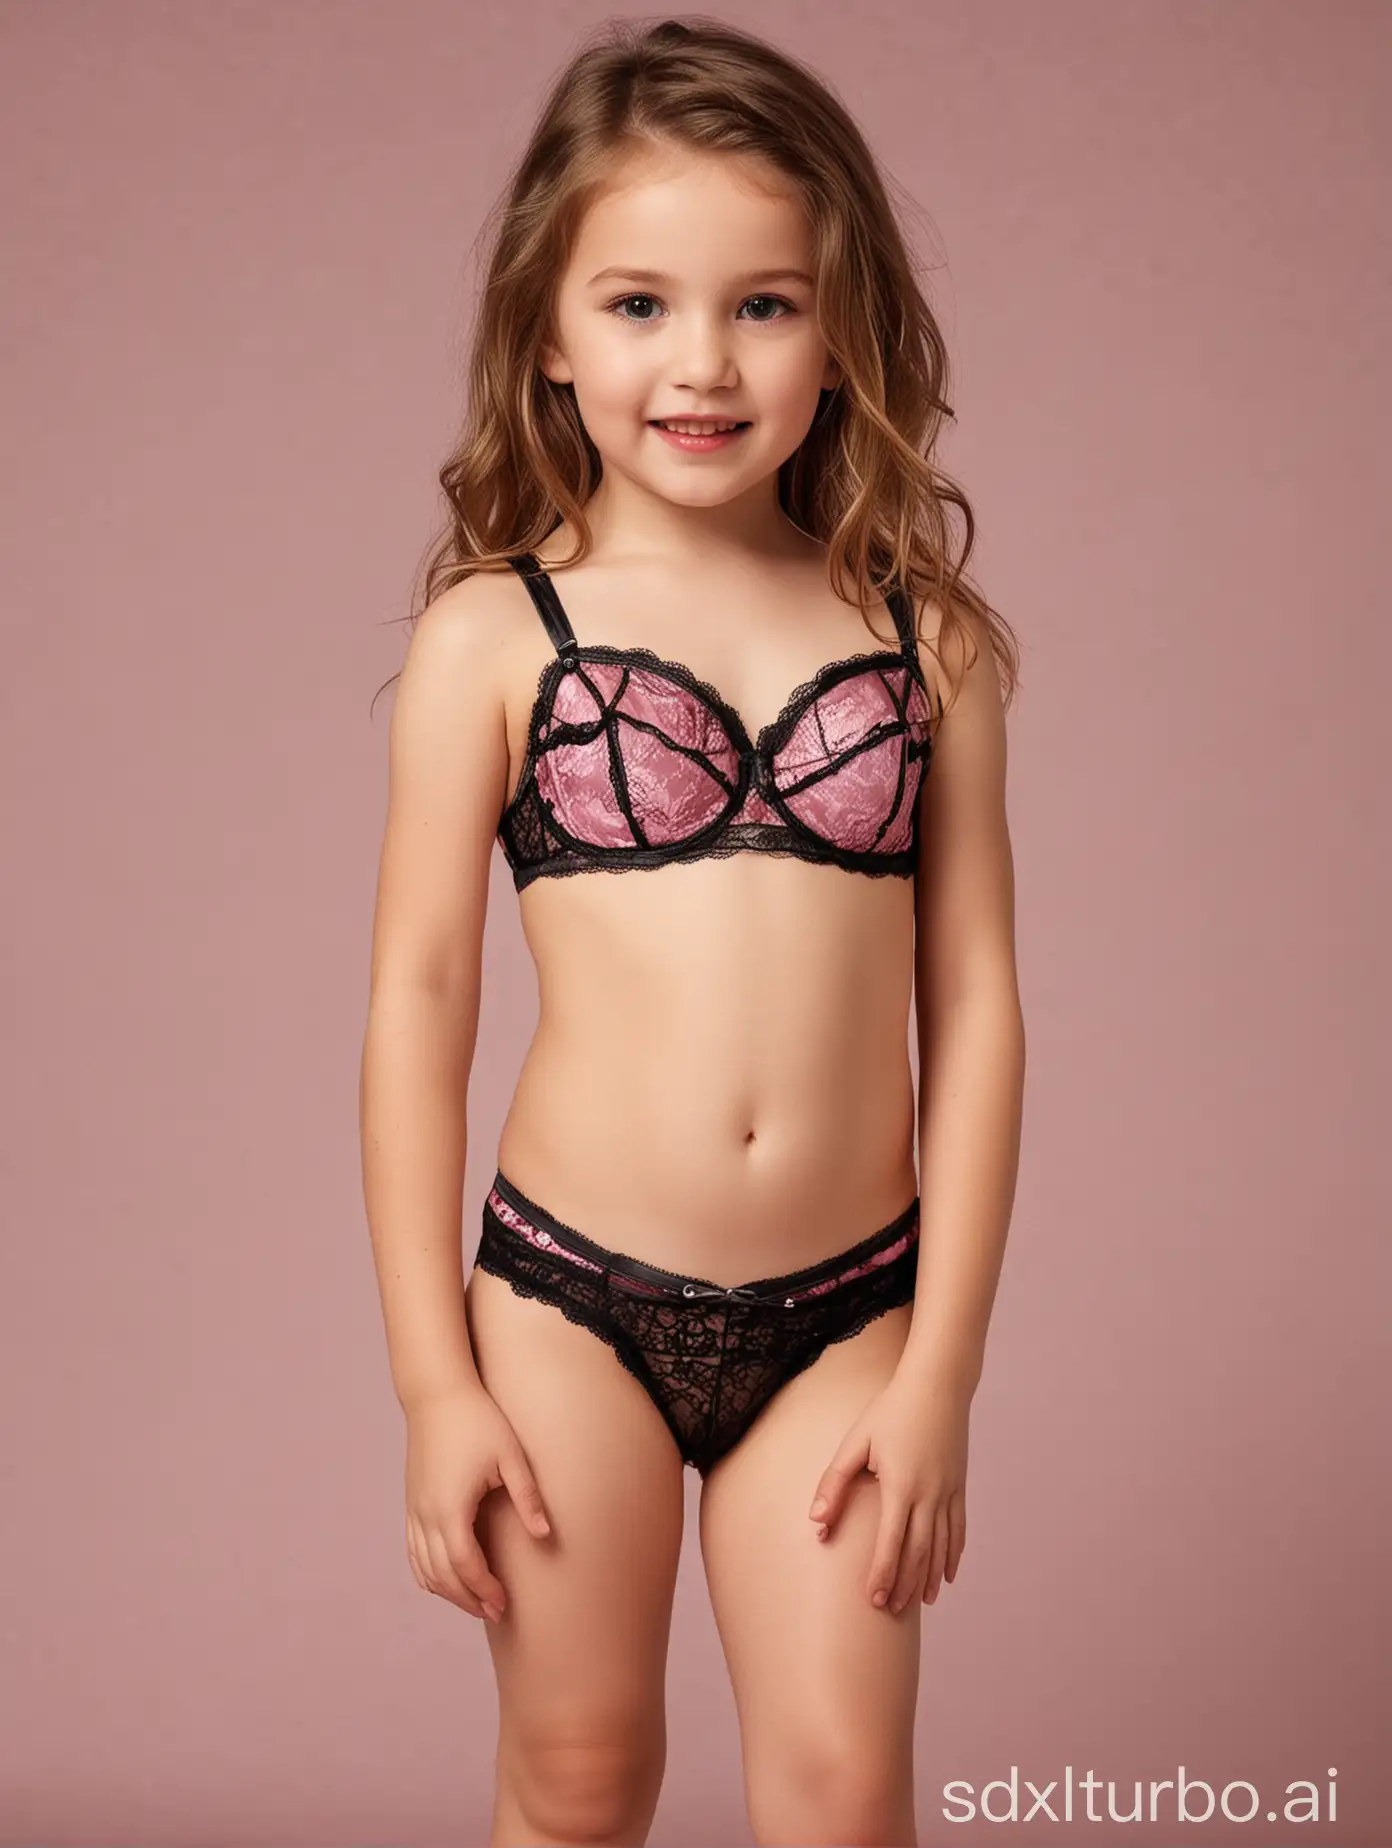 Adorable-Child-in-Cute-and-Playful-Lingerie